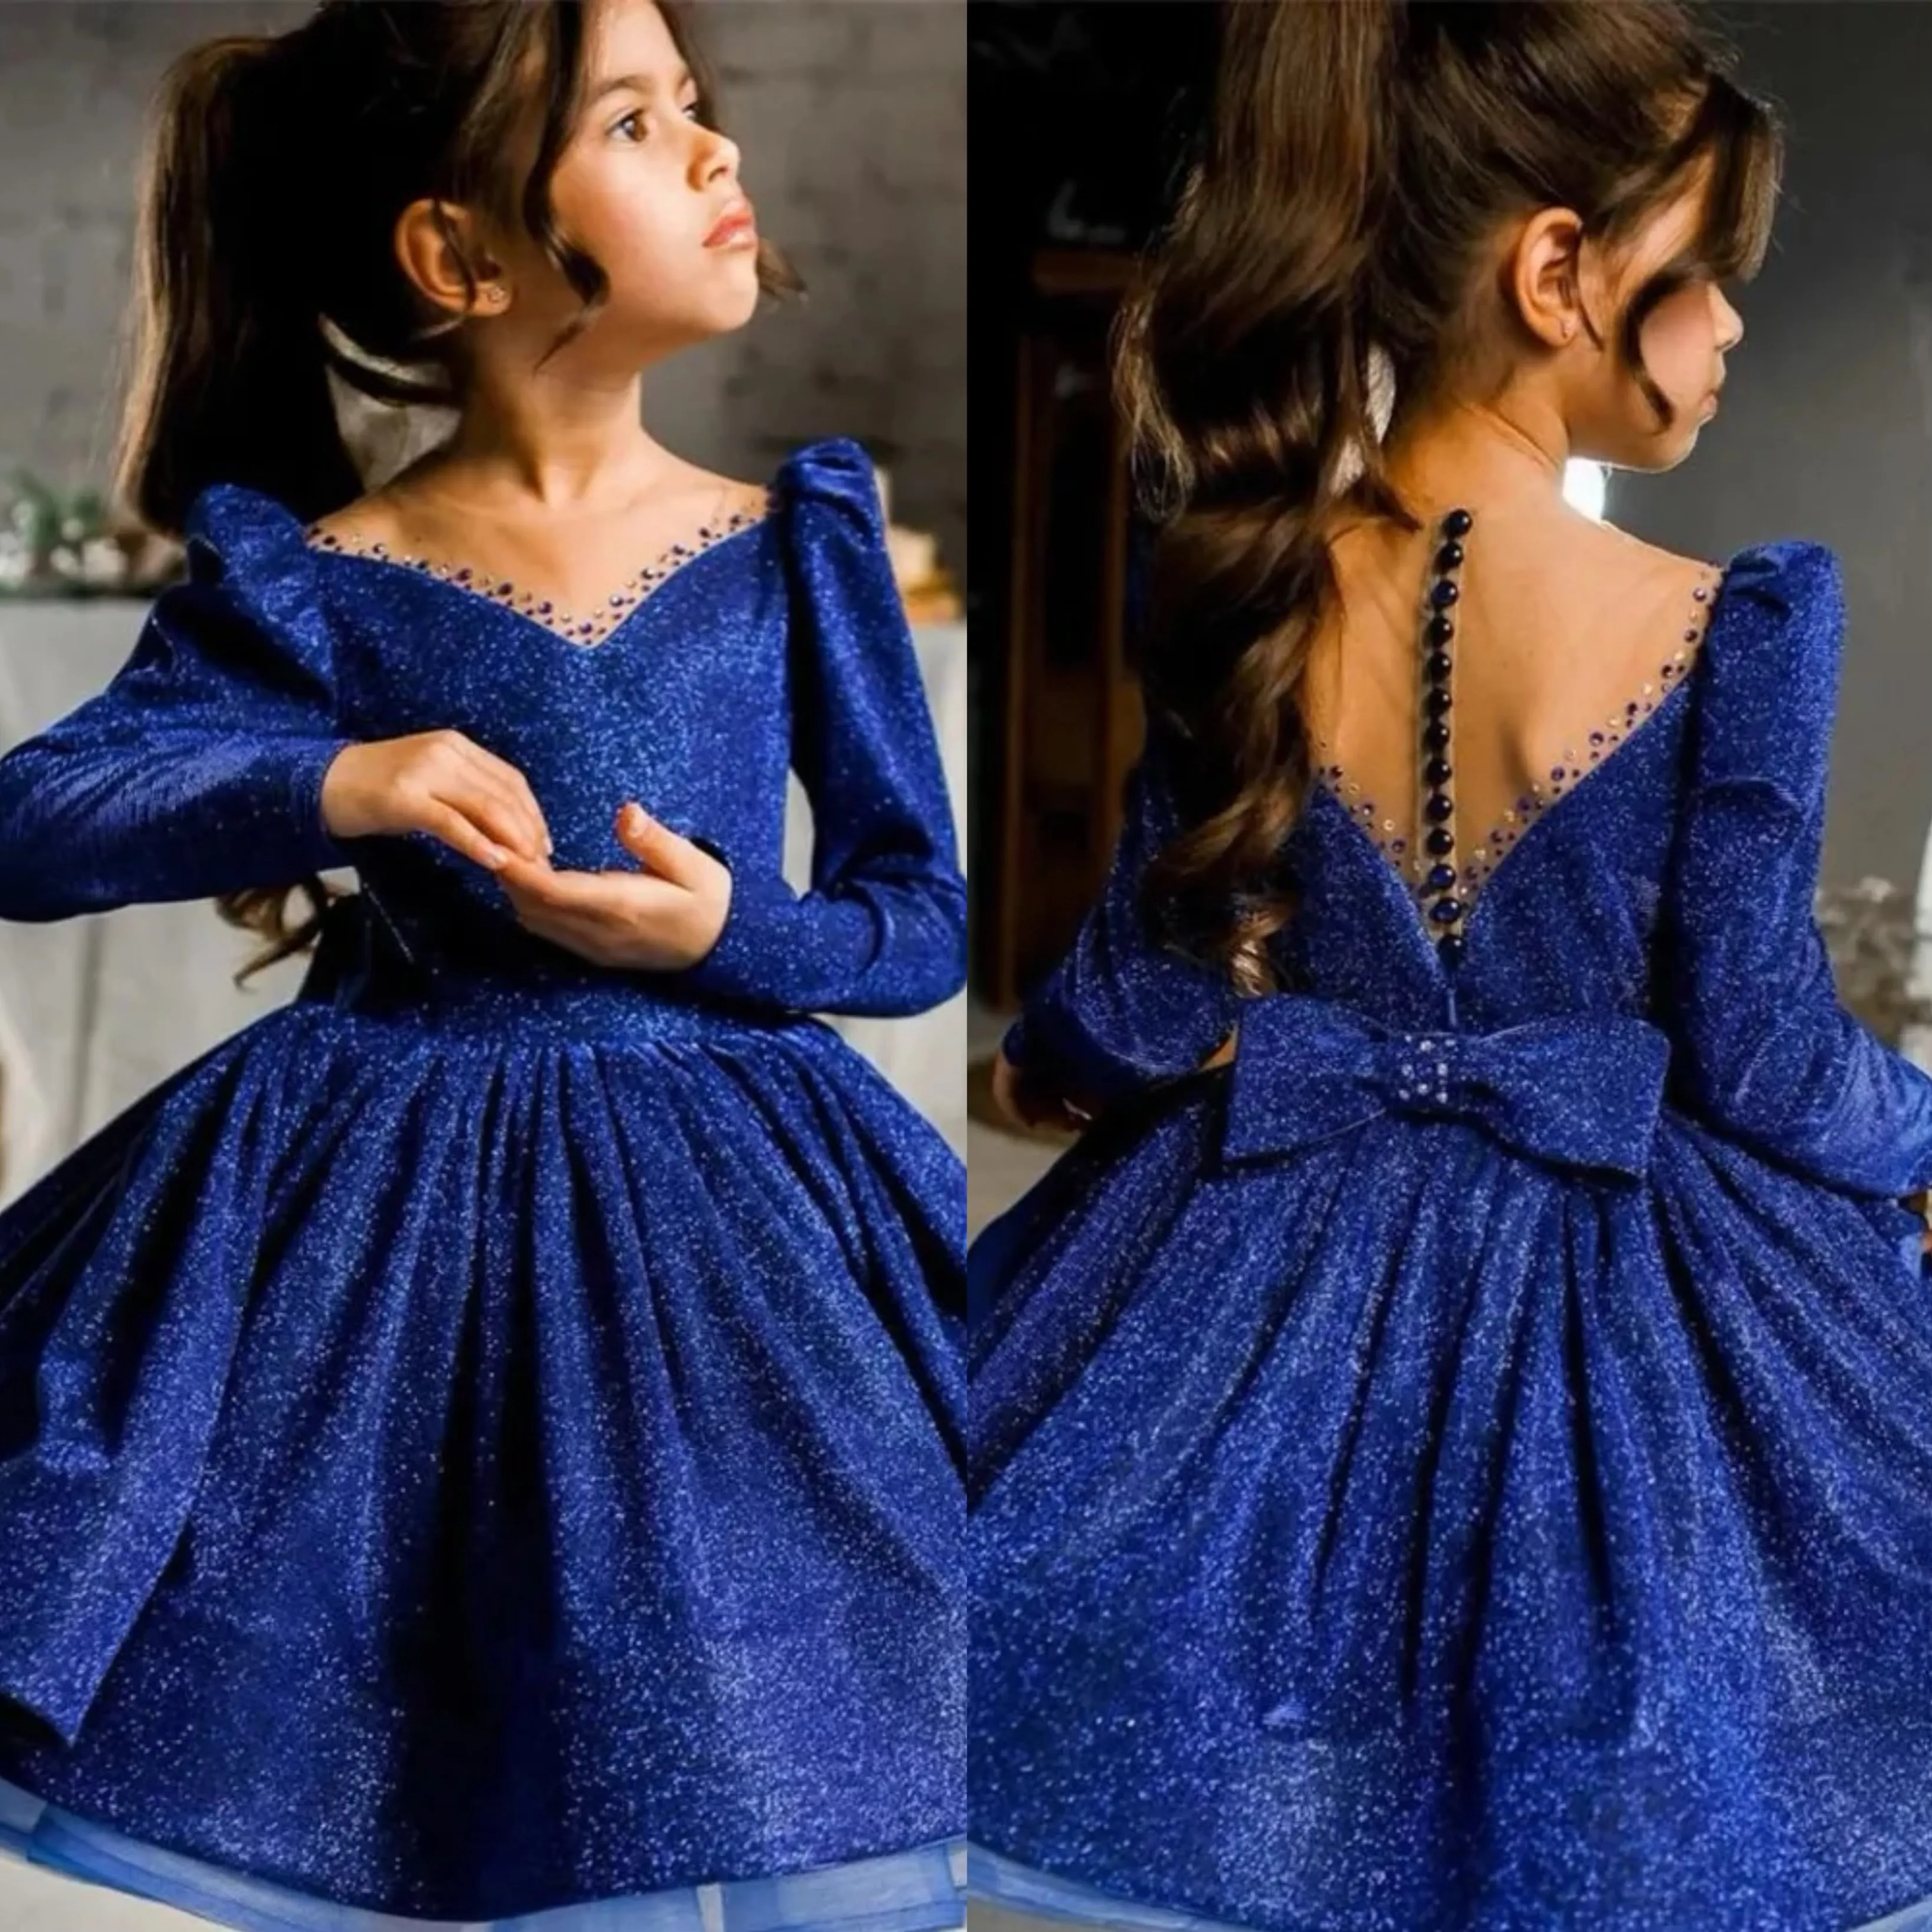 Blue Puffy Flower Girl Dress Pearls Beadings Neck Mini Kids Birthday Party Gown Glitter A Line Bow Infant Baby Pageant Gowns